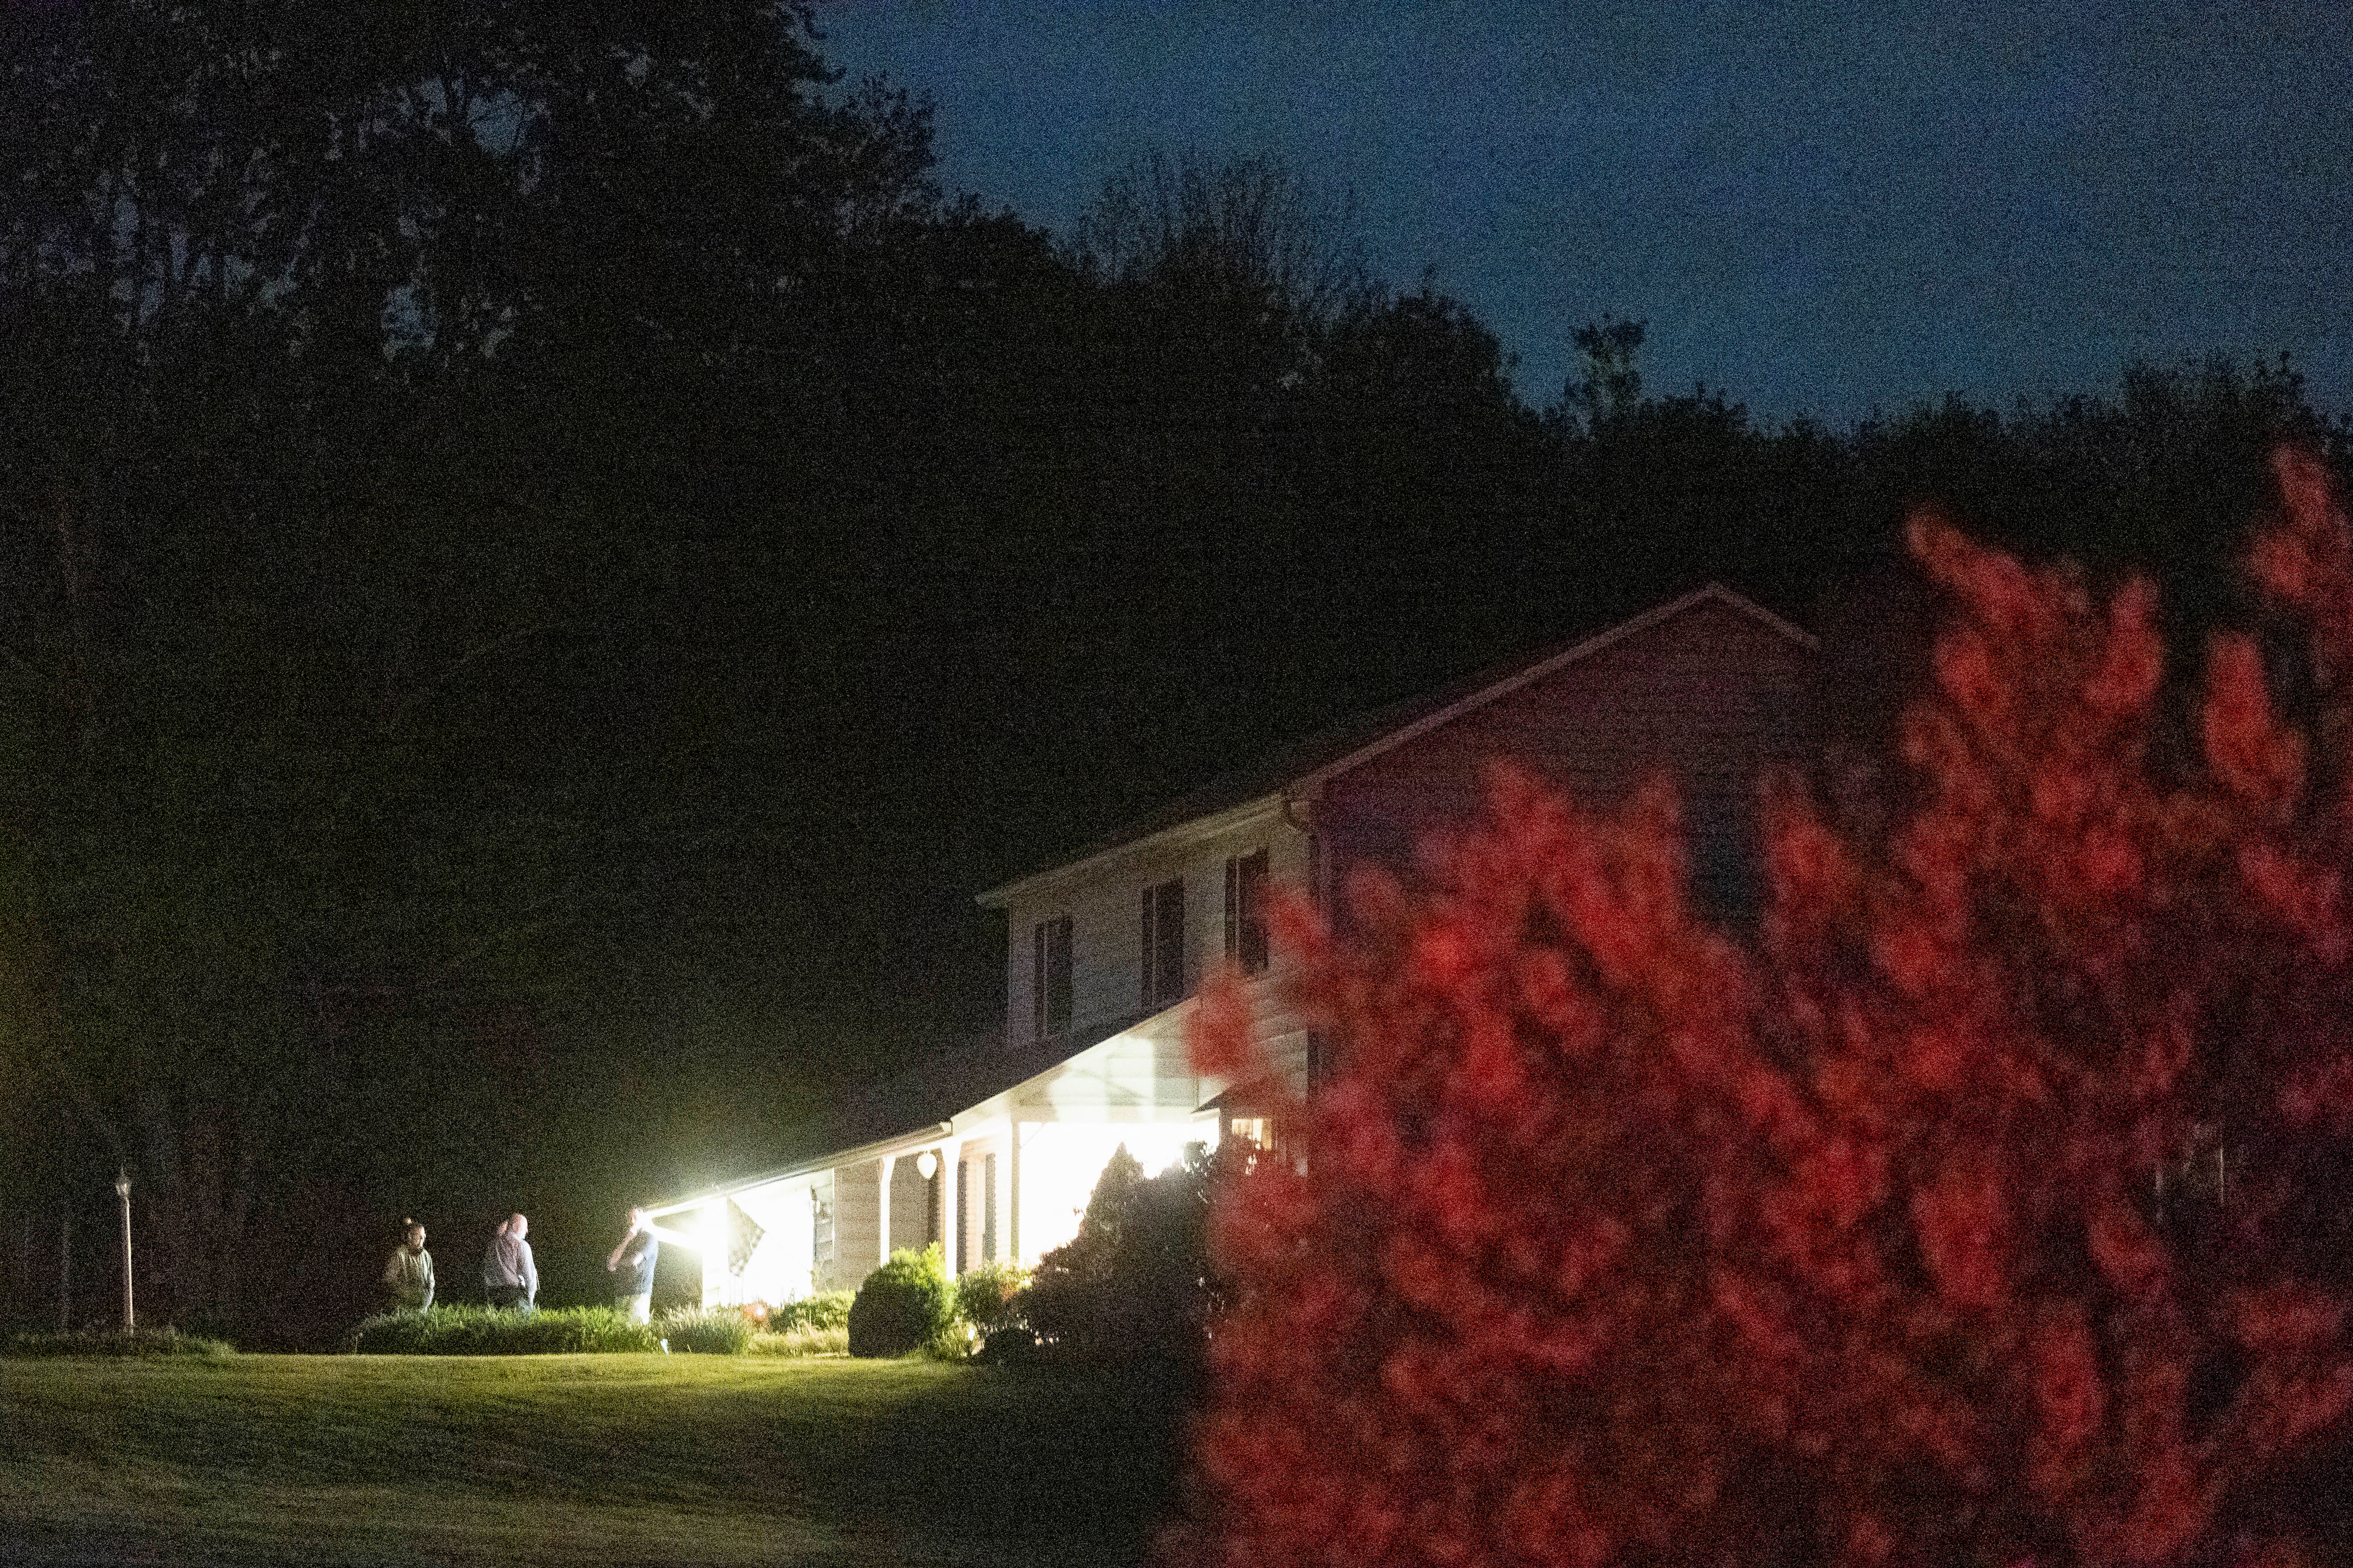 Law enforcement personnel are seen at the home of Buffalo supermarket shooting suspect, in Conklin